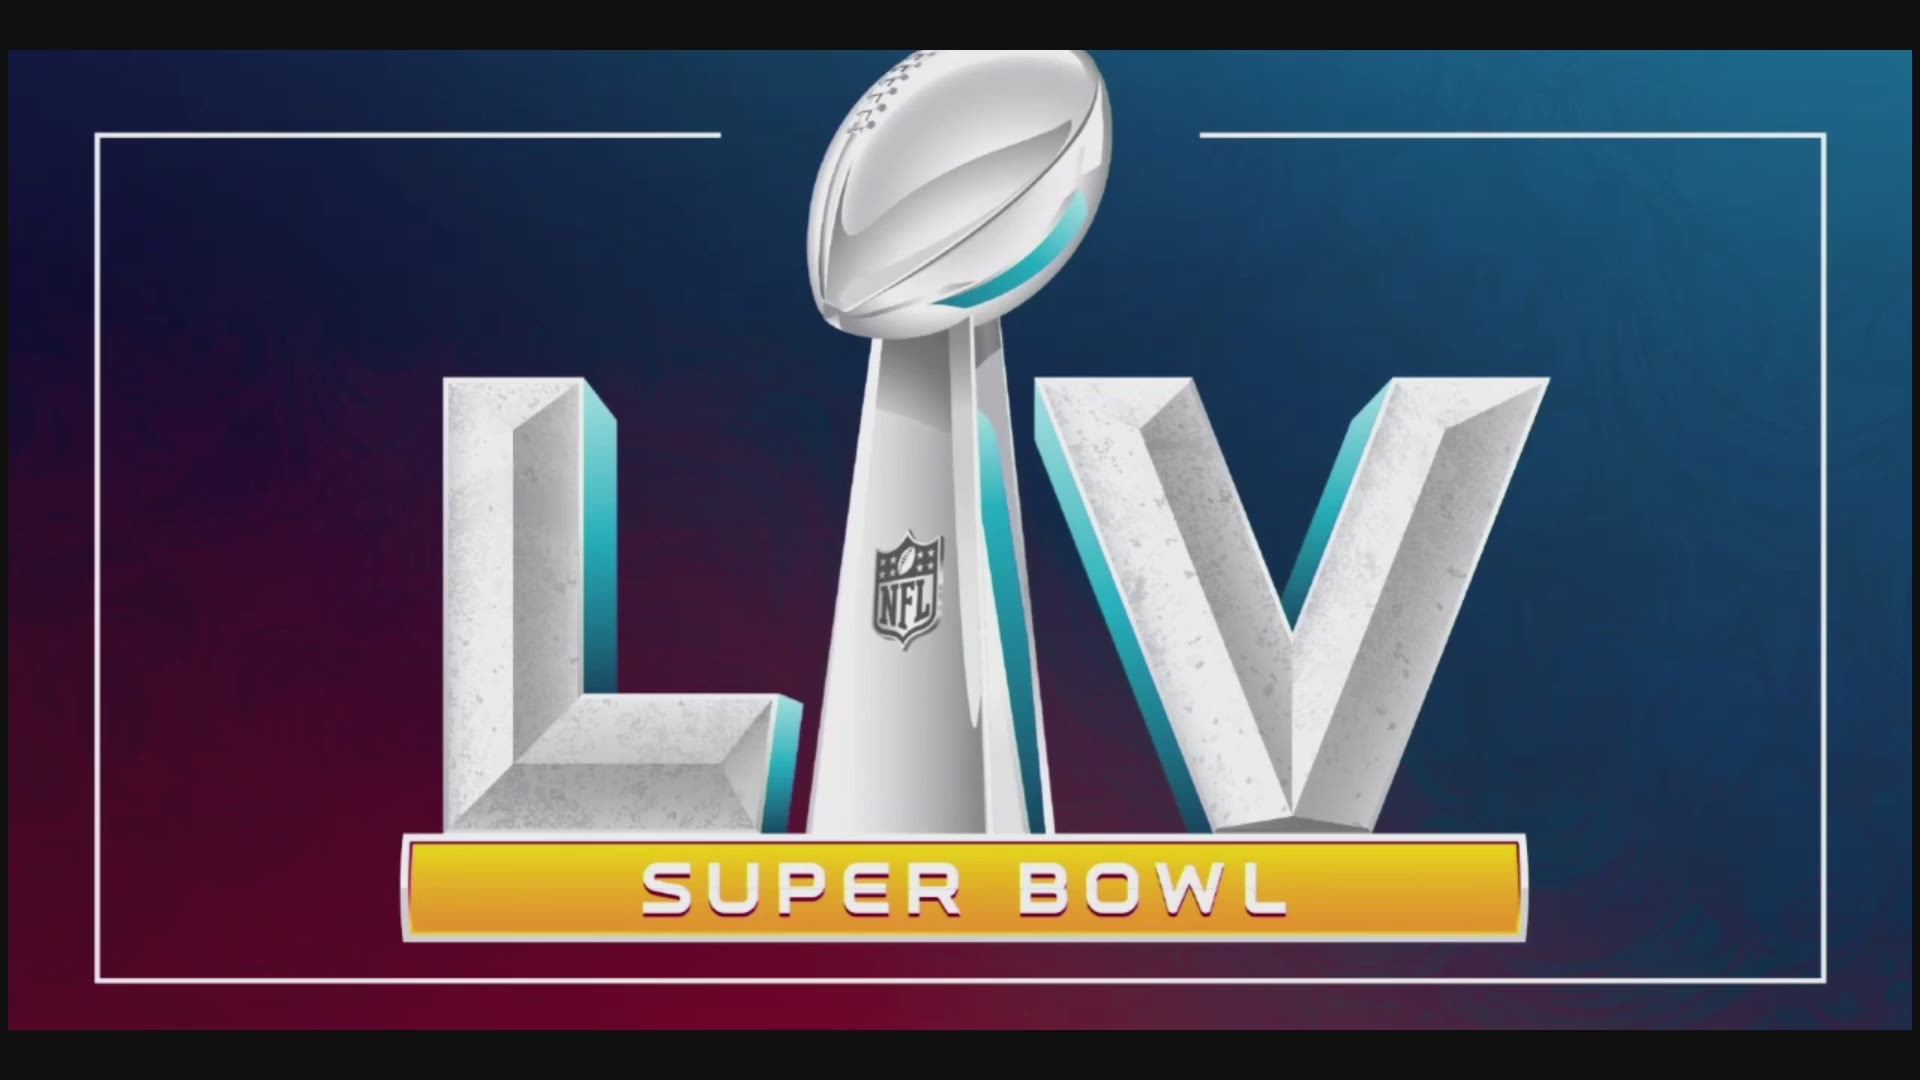 Before the big game on Sunday we're breaking down five Super Bowl facts you may not know about.